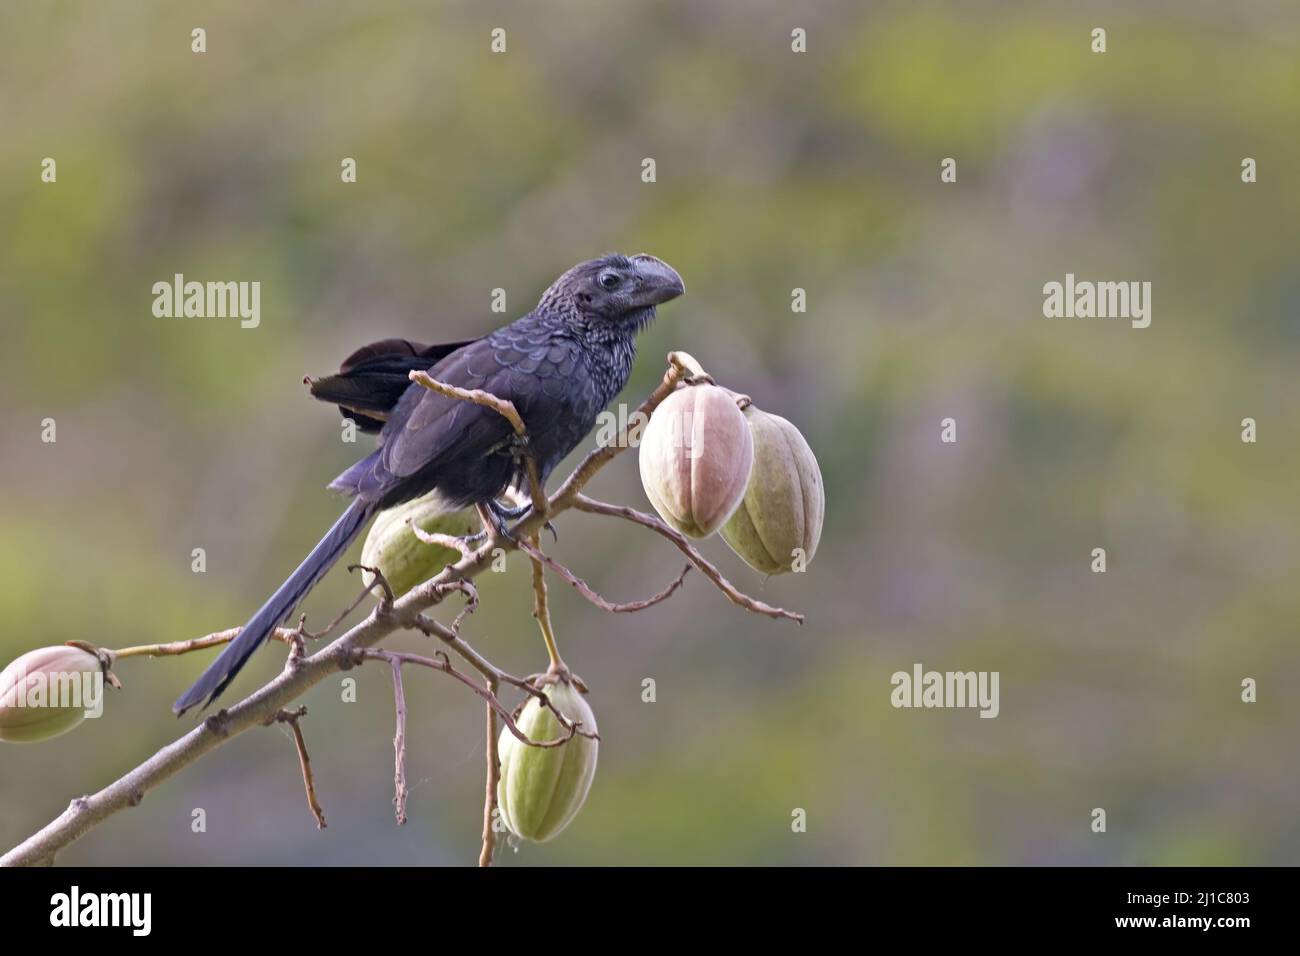 A Smooth-billed Ani, Crotophaga ani, on branch with fruit Stock Photo